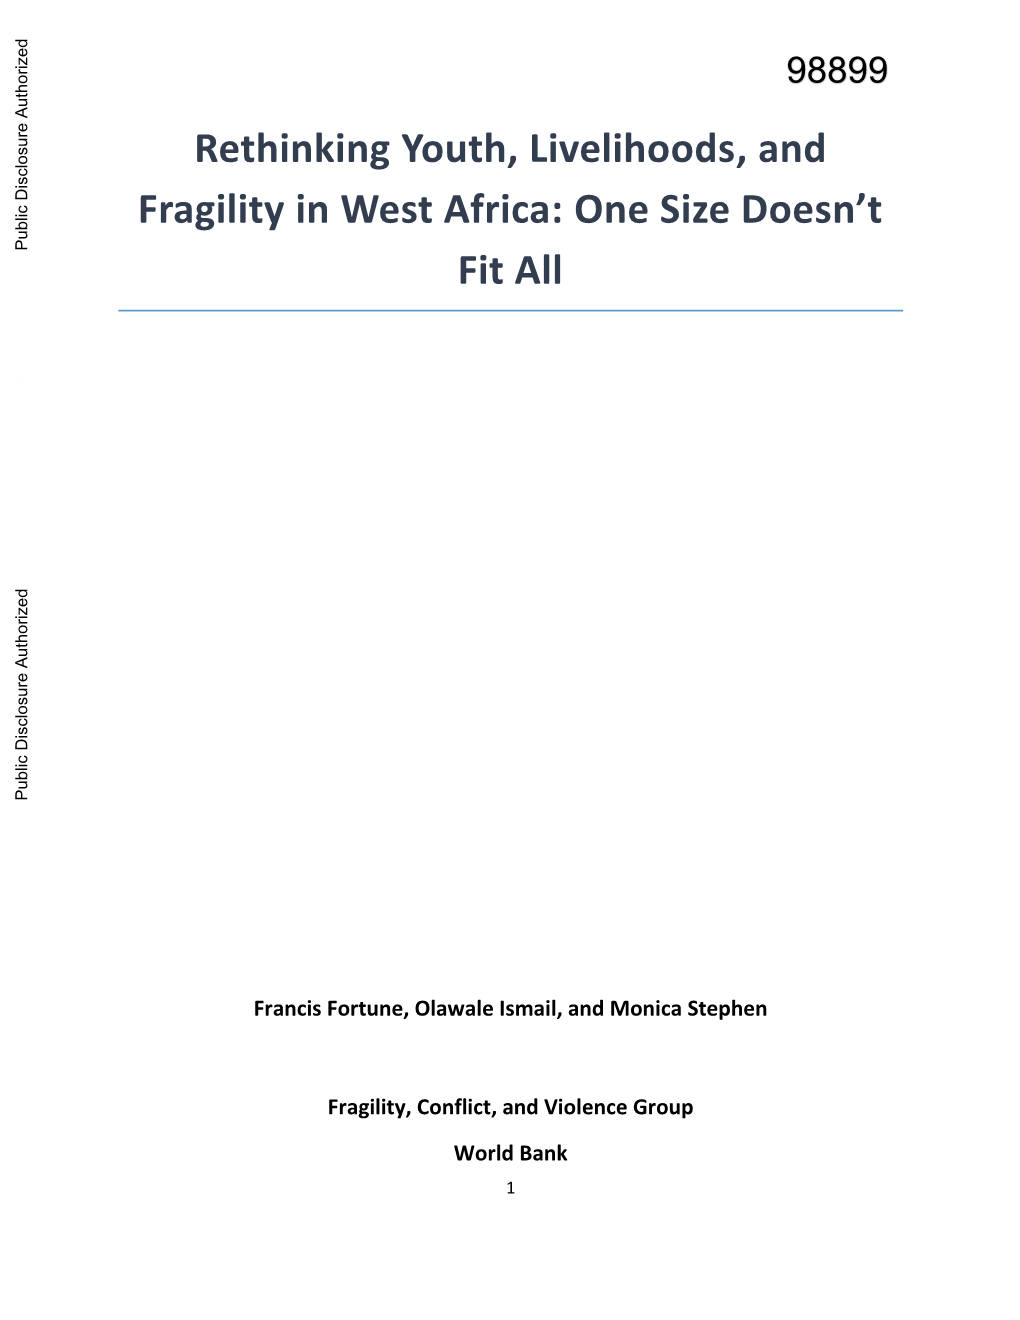 Rethinking Youth, Livelihoods, and Fragility in West Africa: One Size Doesn’T Public Disclosure Authorized Fit All